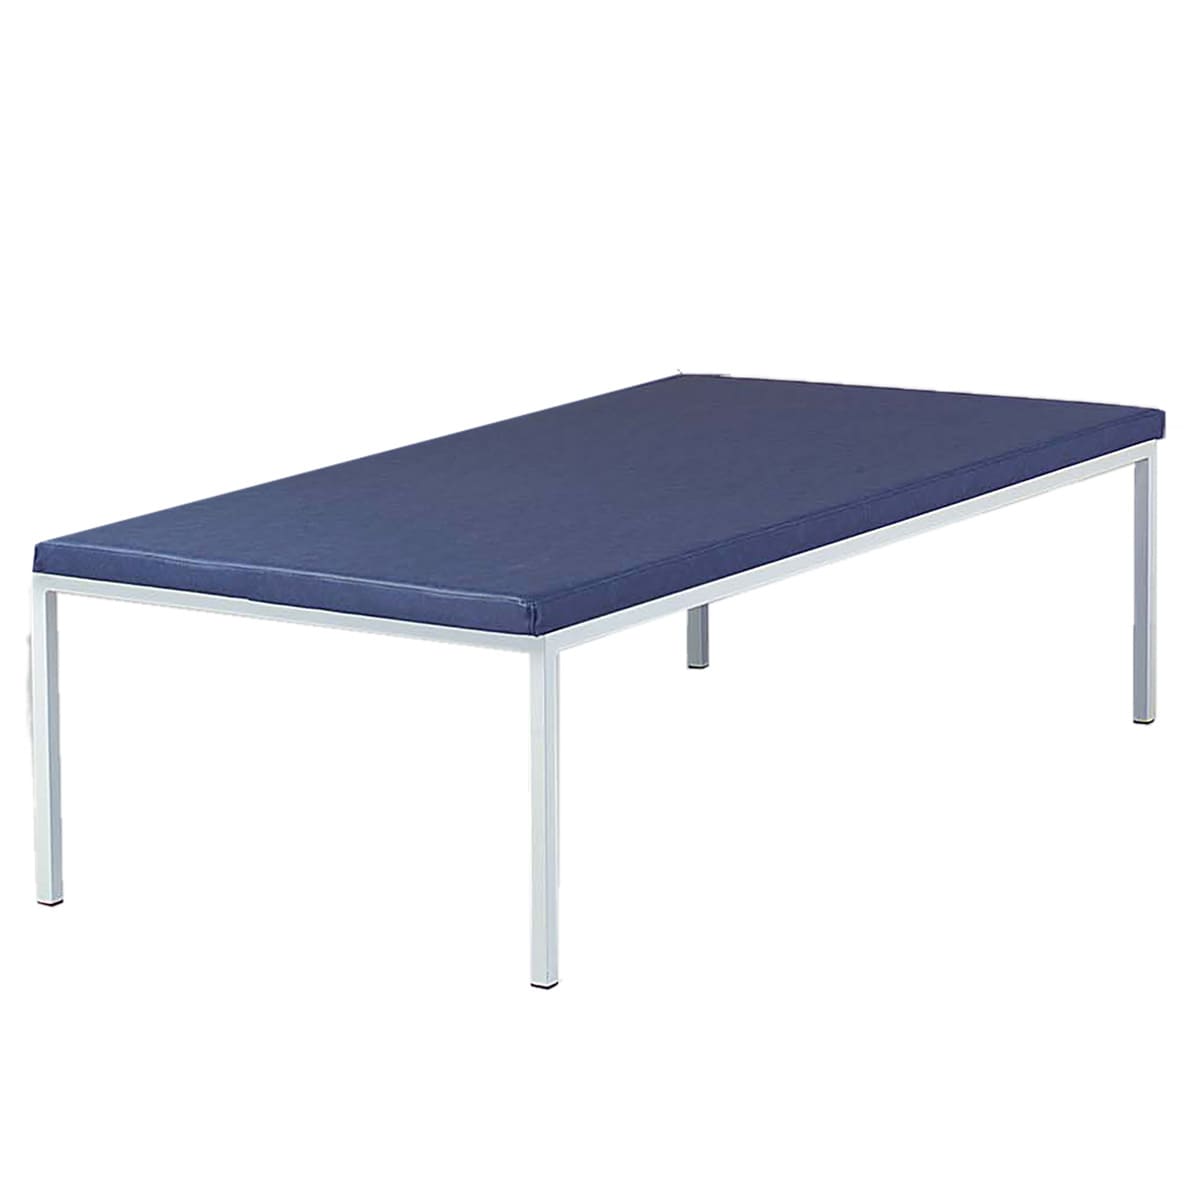 BOBATH Osteo and Physio table, height 50cm